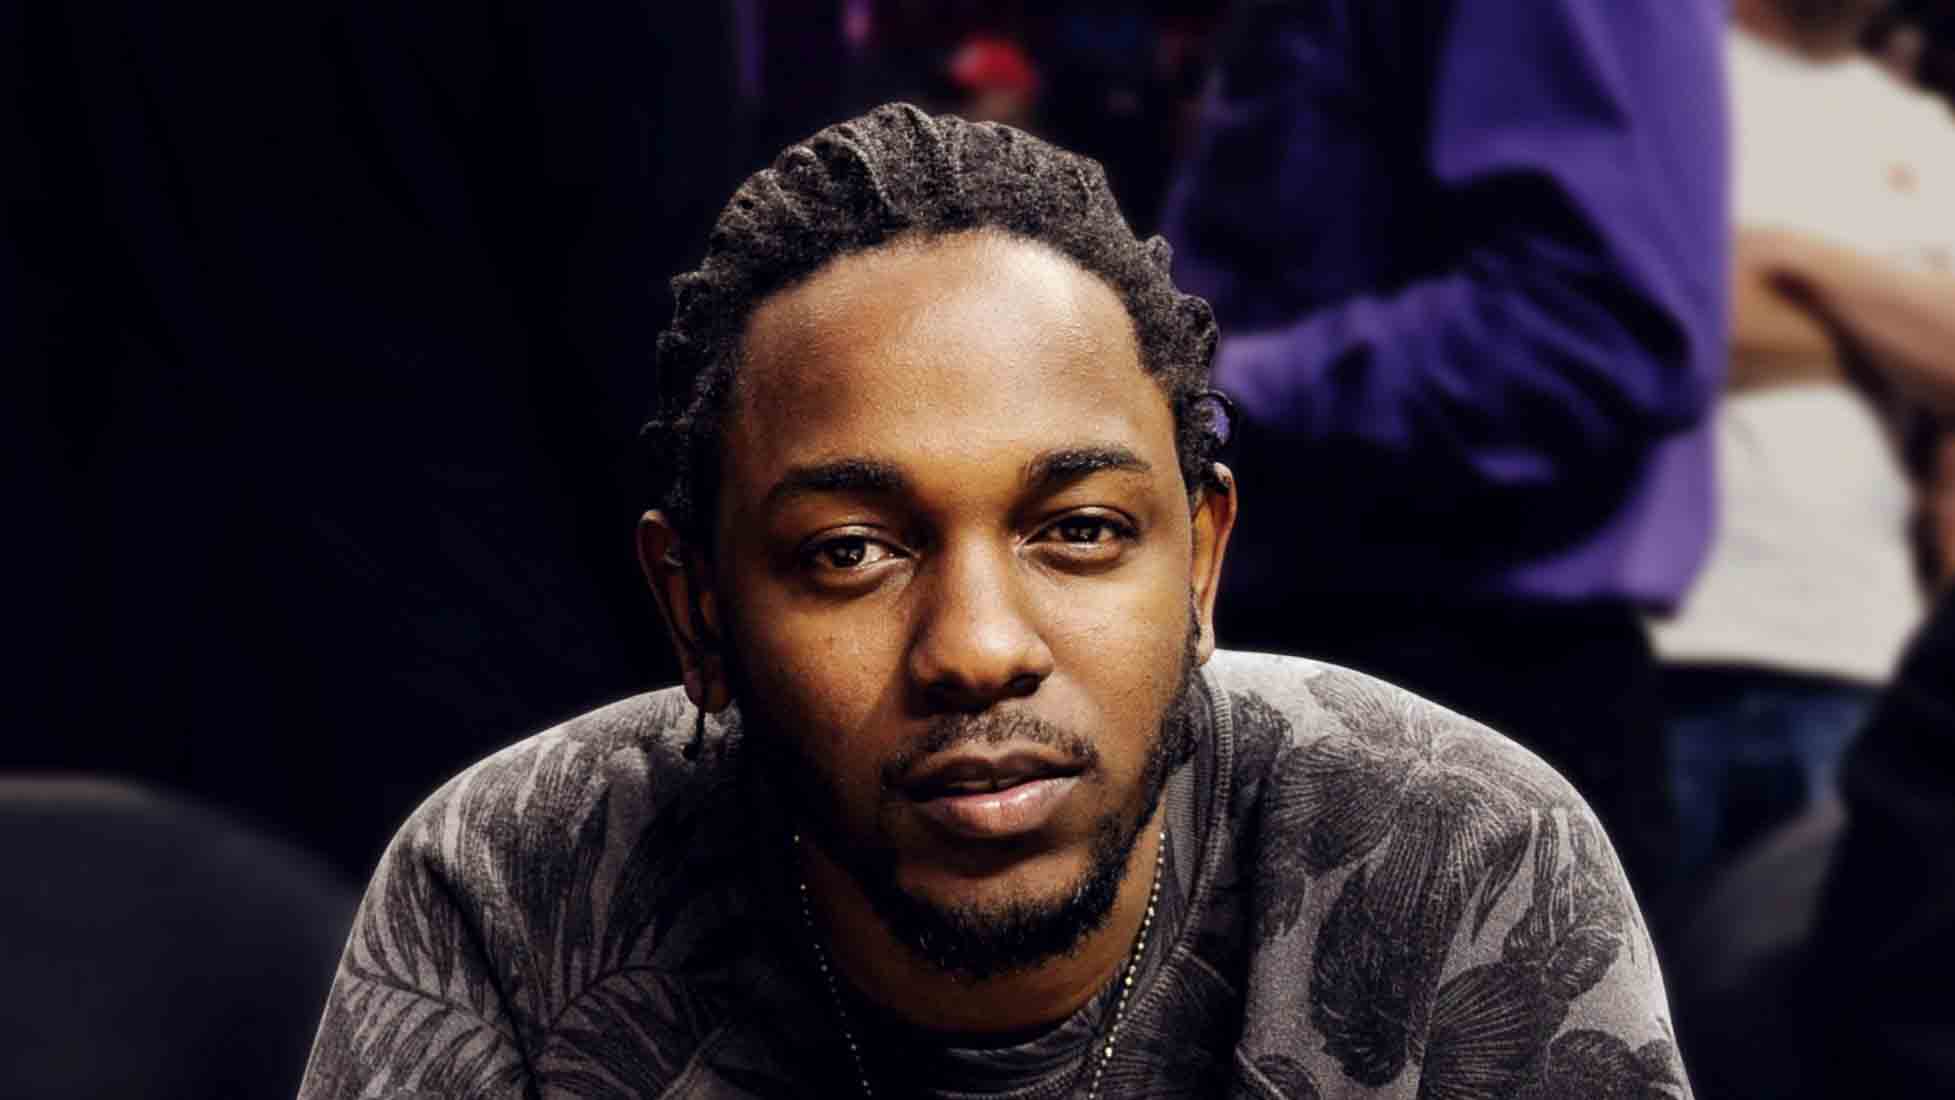 Kendrick Lamar Duckworth (born June 17, 1987) is an American rapper, songwriter, and record producer. He is regarded as one of the most skillful ...